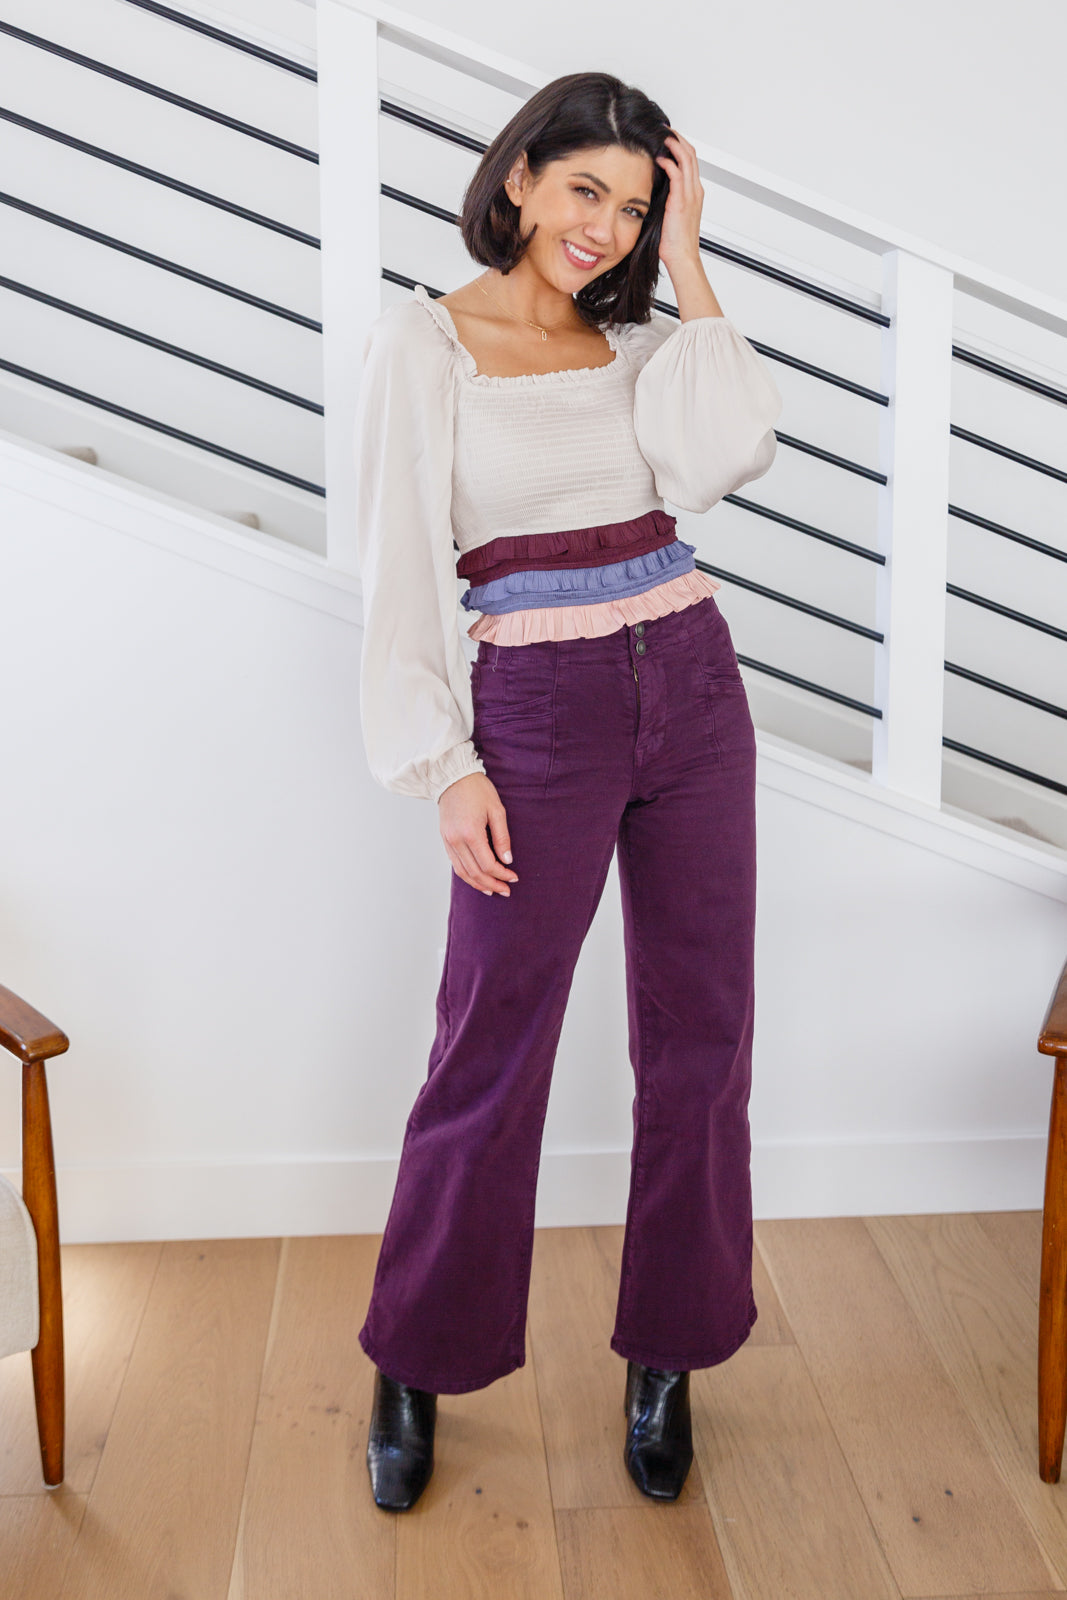 Treat yourself to a timeless style with our Petunia High Rise Wide Leg Jeans. Comfort meets sophistication in this modern design, featuring a tailored waistband, welted pockets, double button waistband, and contour seaming for an ultra-flattering fit